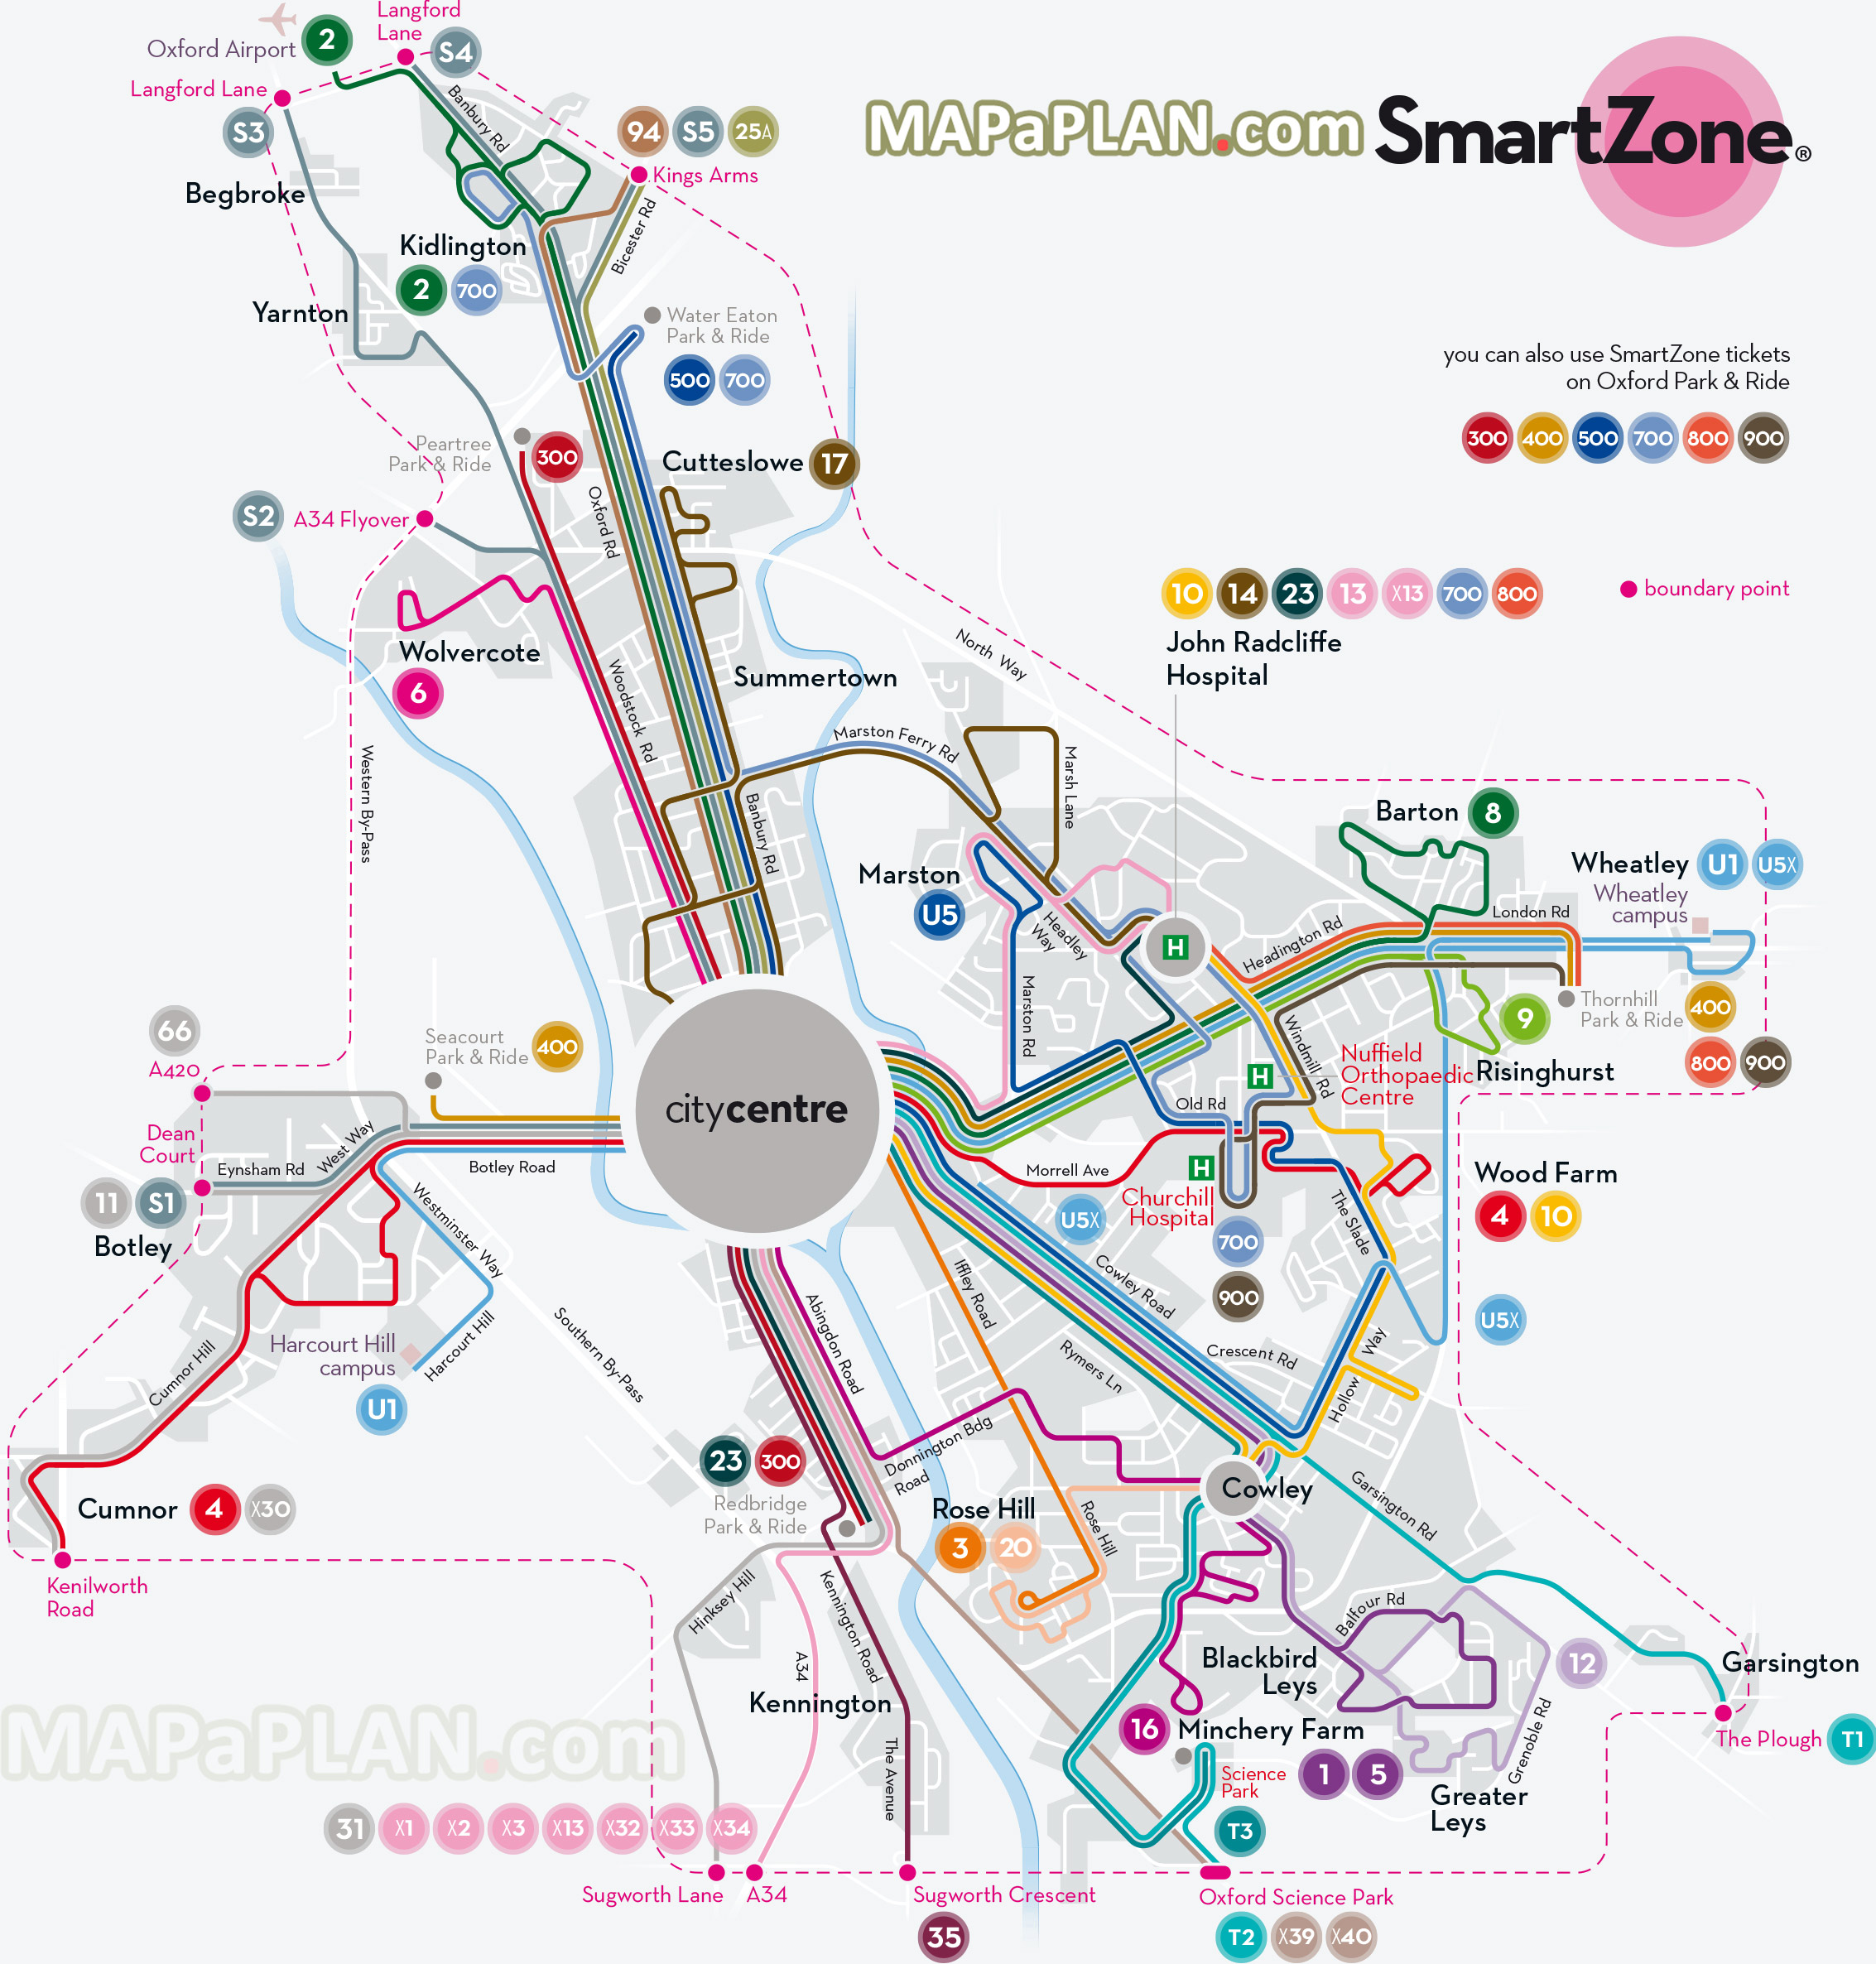 SmartZone area public transport bus network transit system diagram Oxford top tourist attractions map